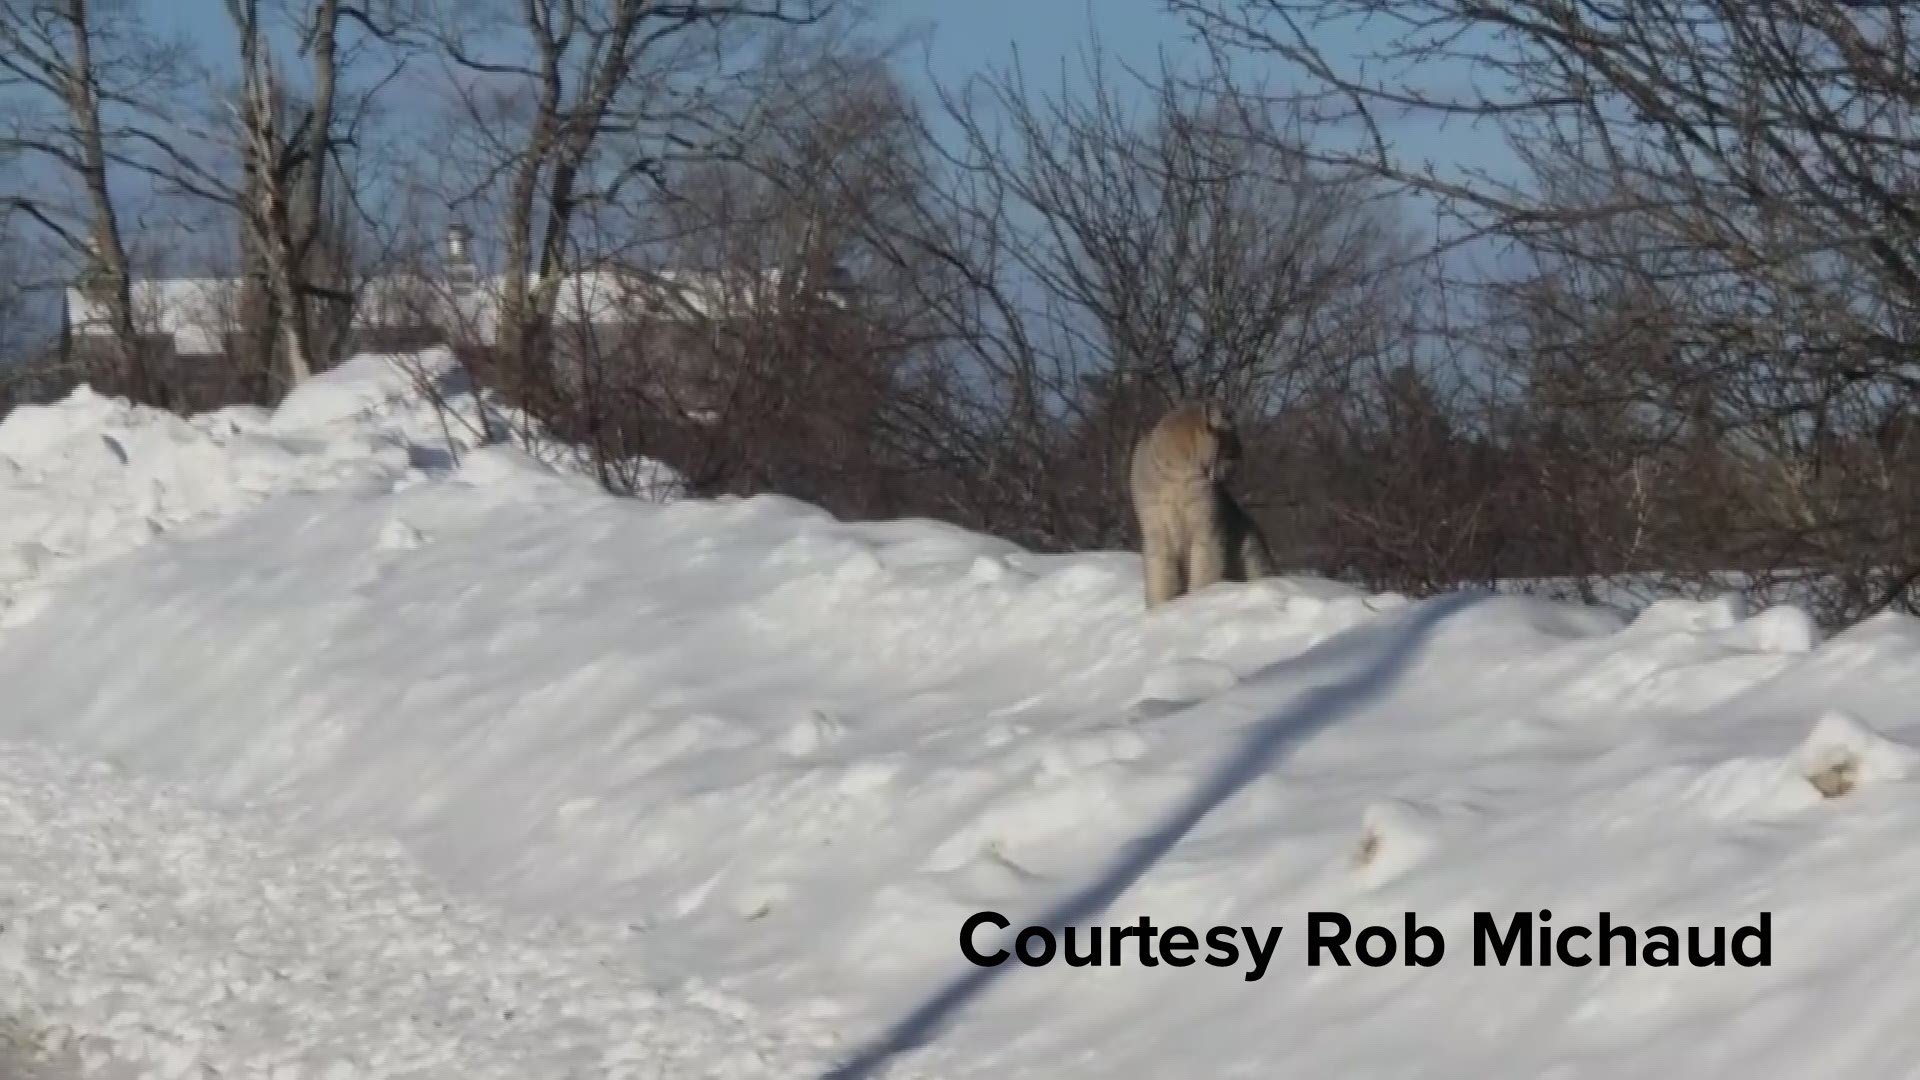 More videos from Rob Michaud of the lynx near Stacyville.